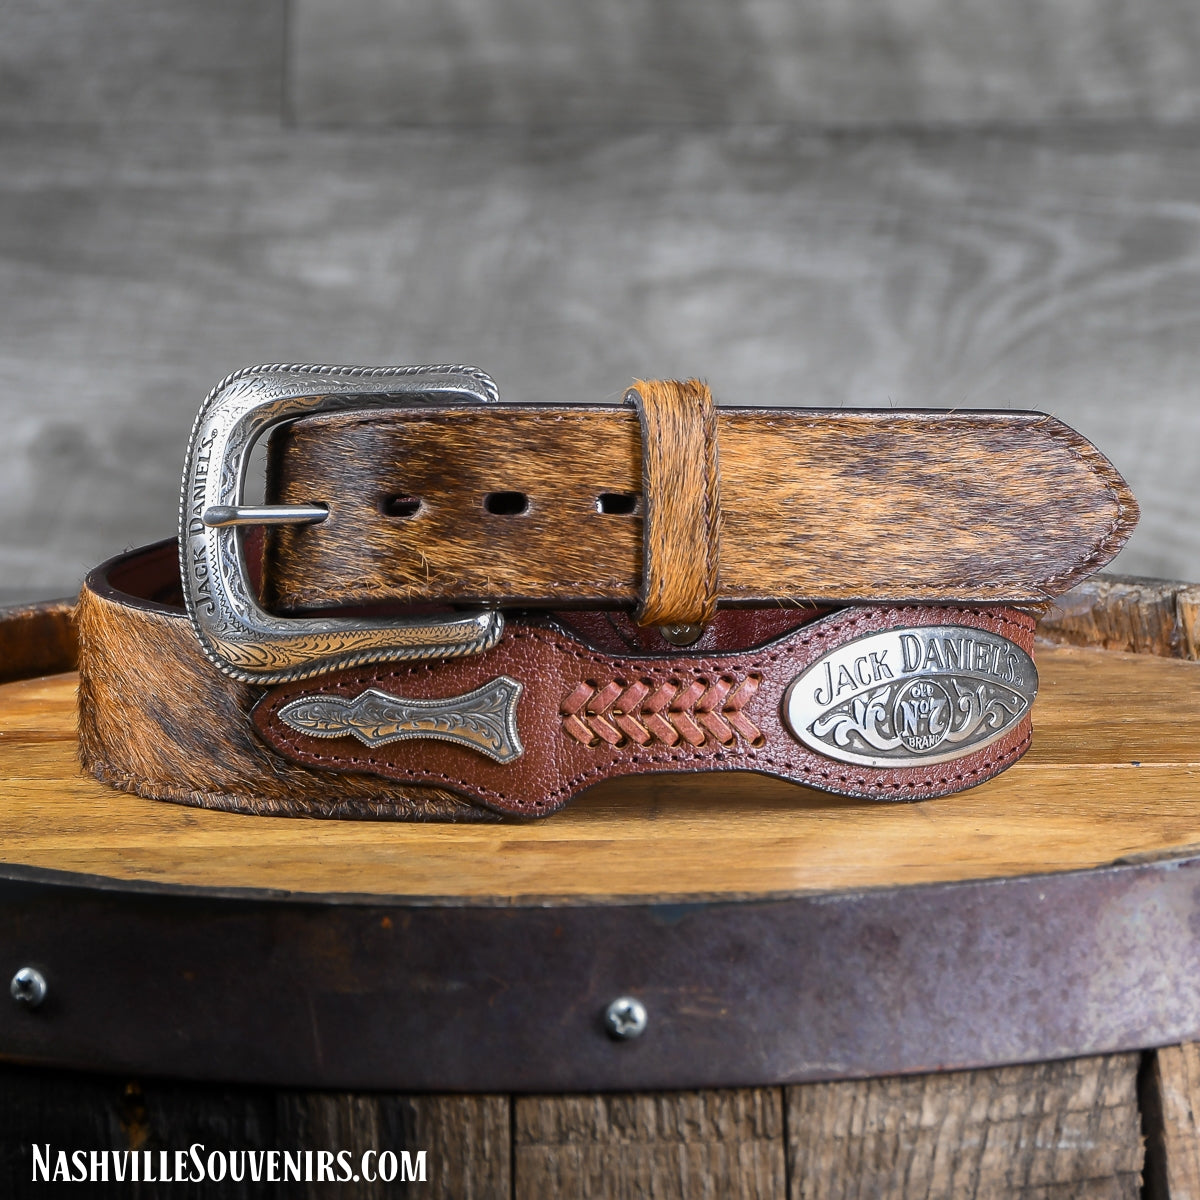 Officially licensed Jack Daniels Belt with Old No.7 Silver Medallions and Cowhide Belt. Get yours today with FREE SHIPPING on all US orders over $75!